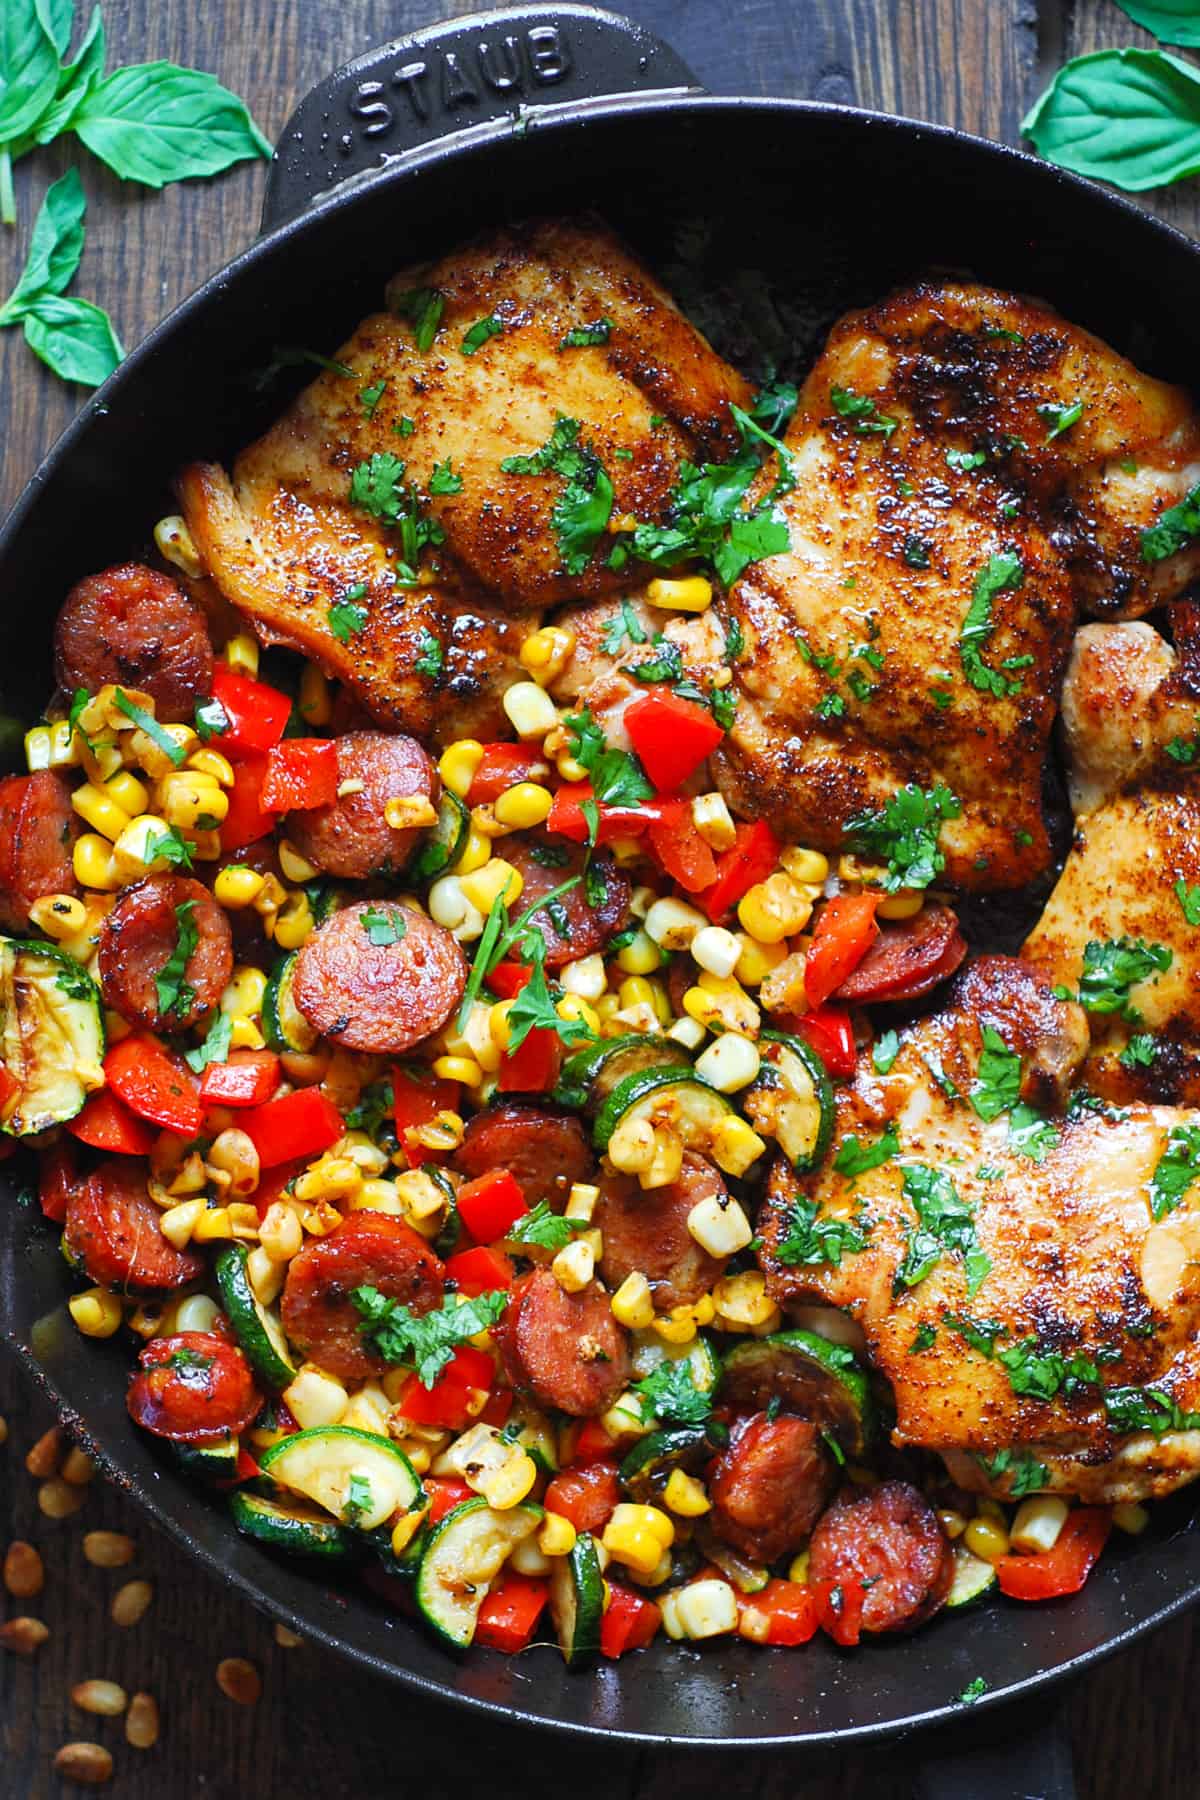 Chicken Sausage and Vegetable Skillet with Corn, Zucchini, and Bell Peppers in a cast iron pan